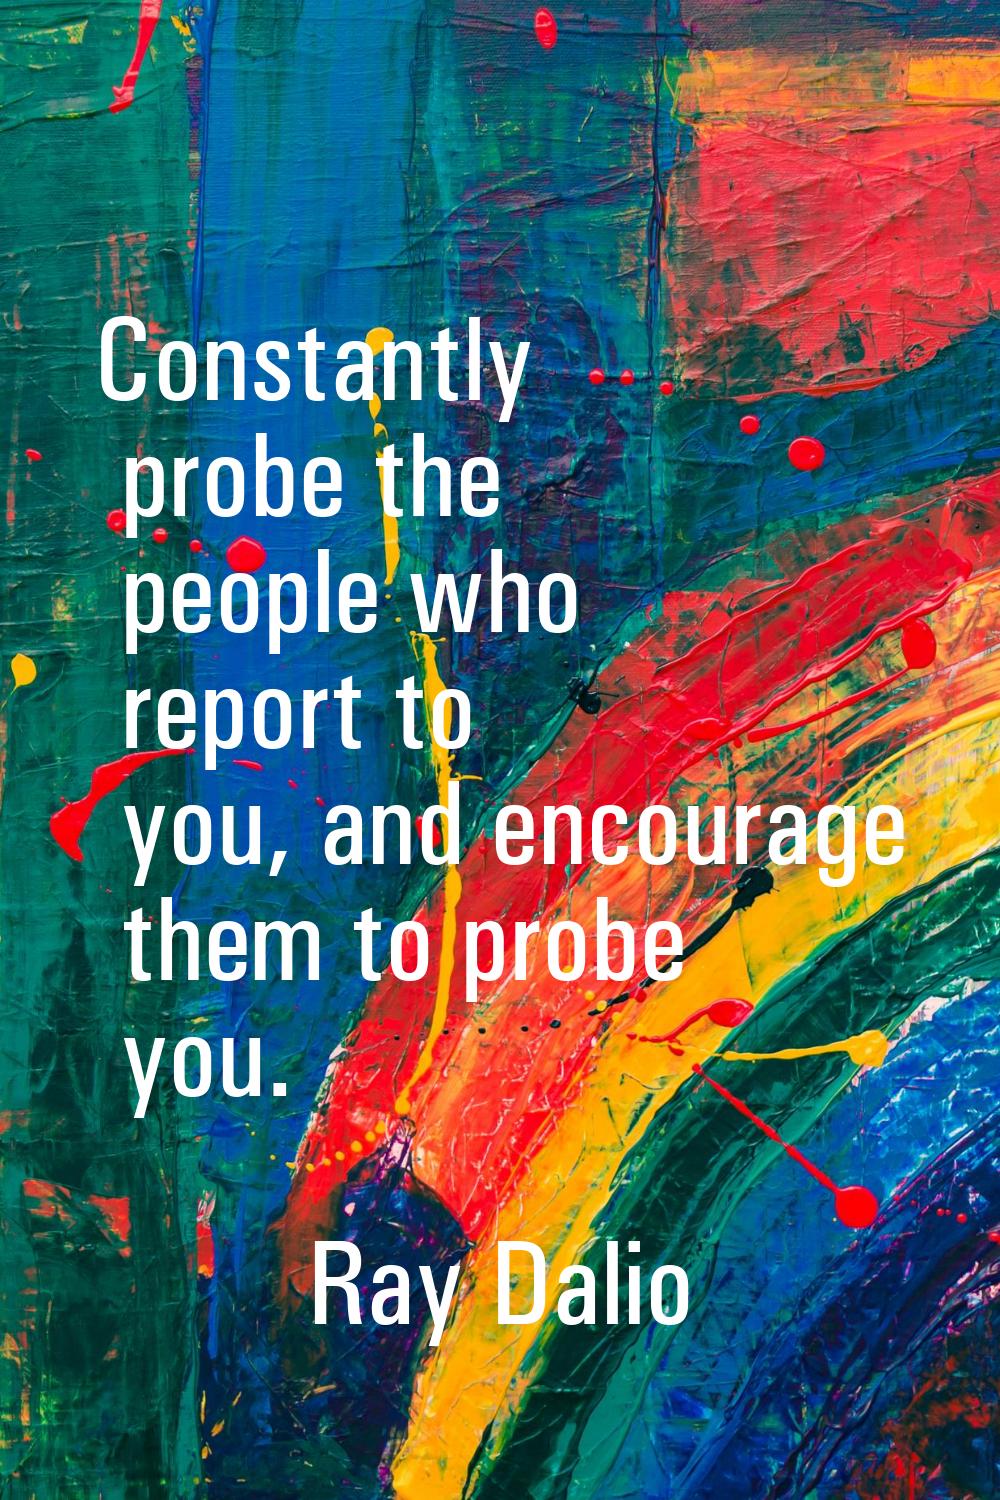 Constantly probe the people who report to you, and encourage them to probe you.